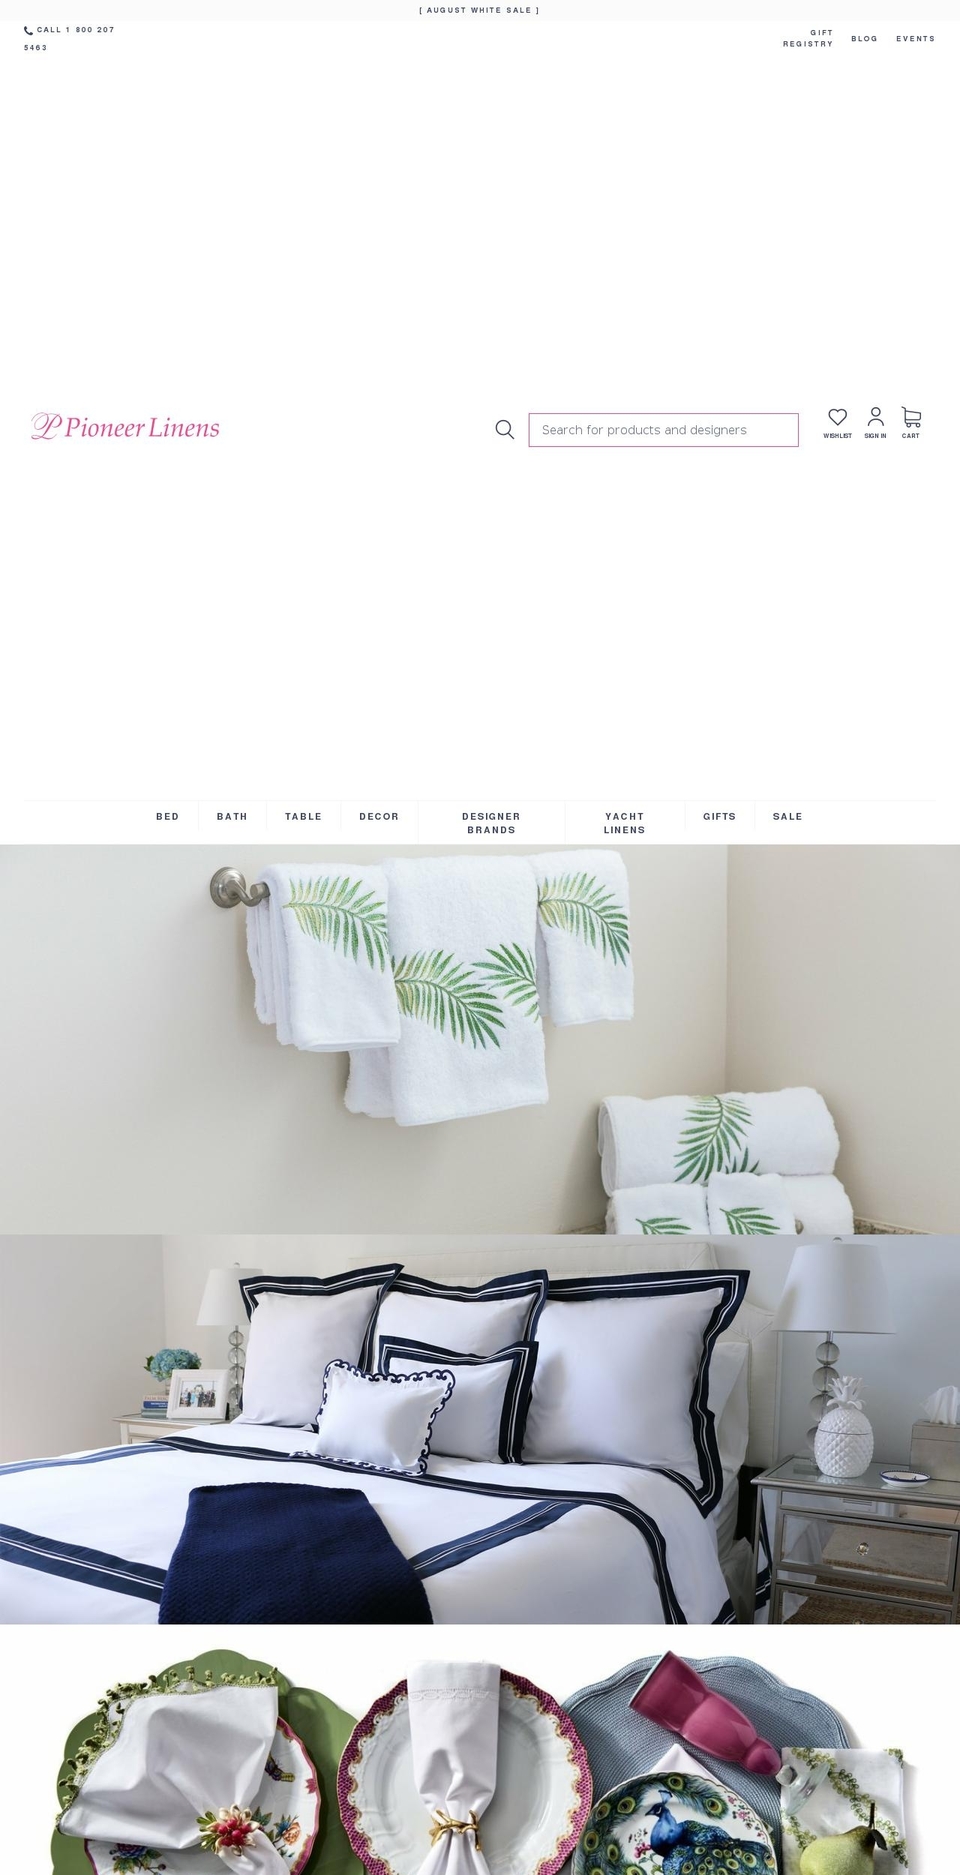 Buko Shopify Theme - Products Consolidation Shopify theme site example mpioneerlinen.org